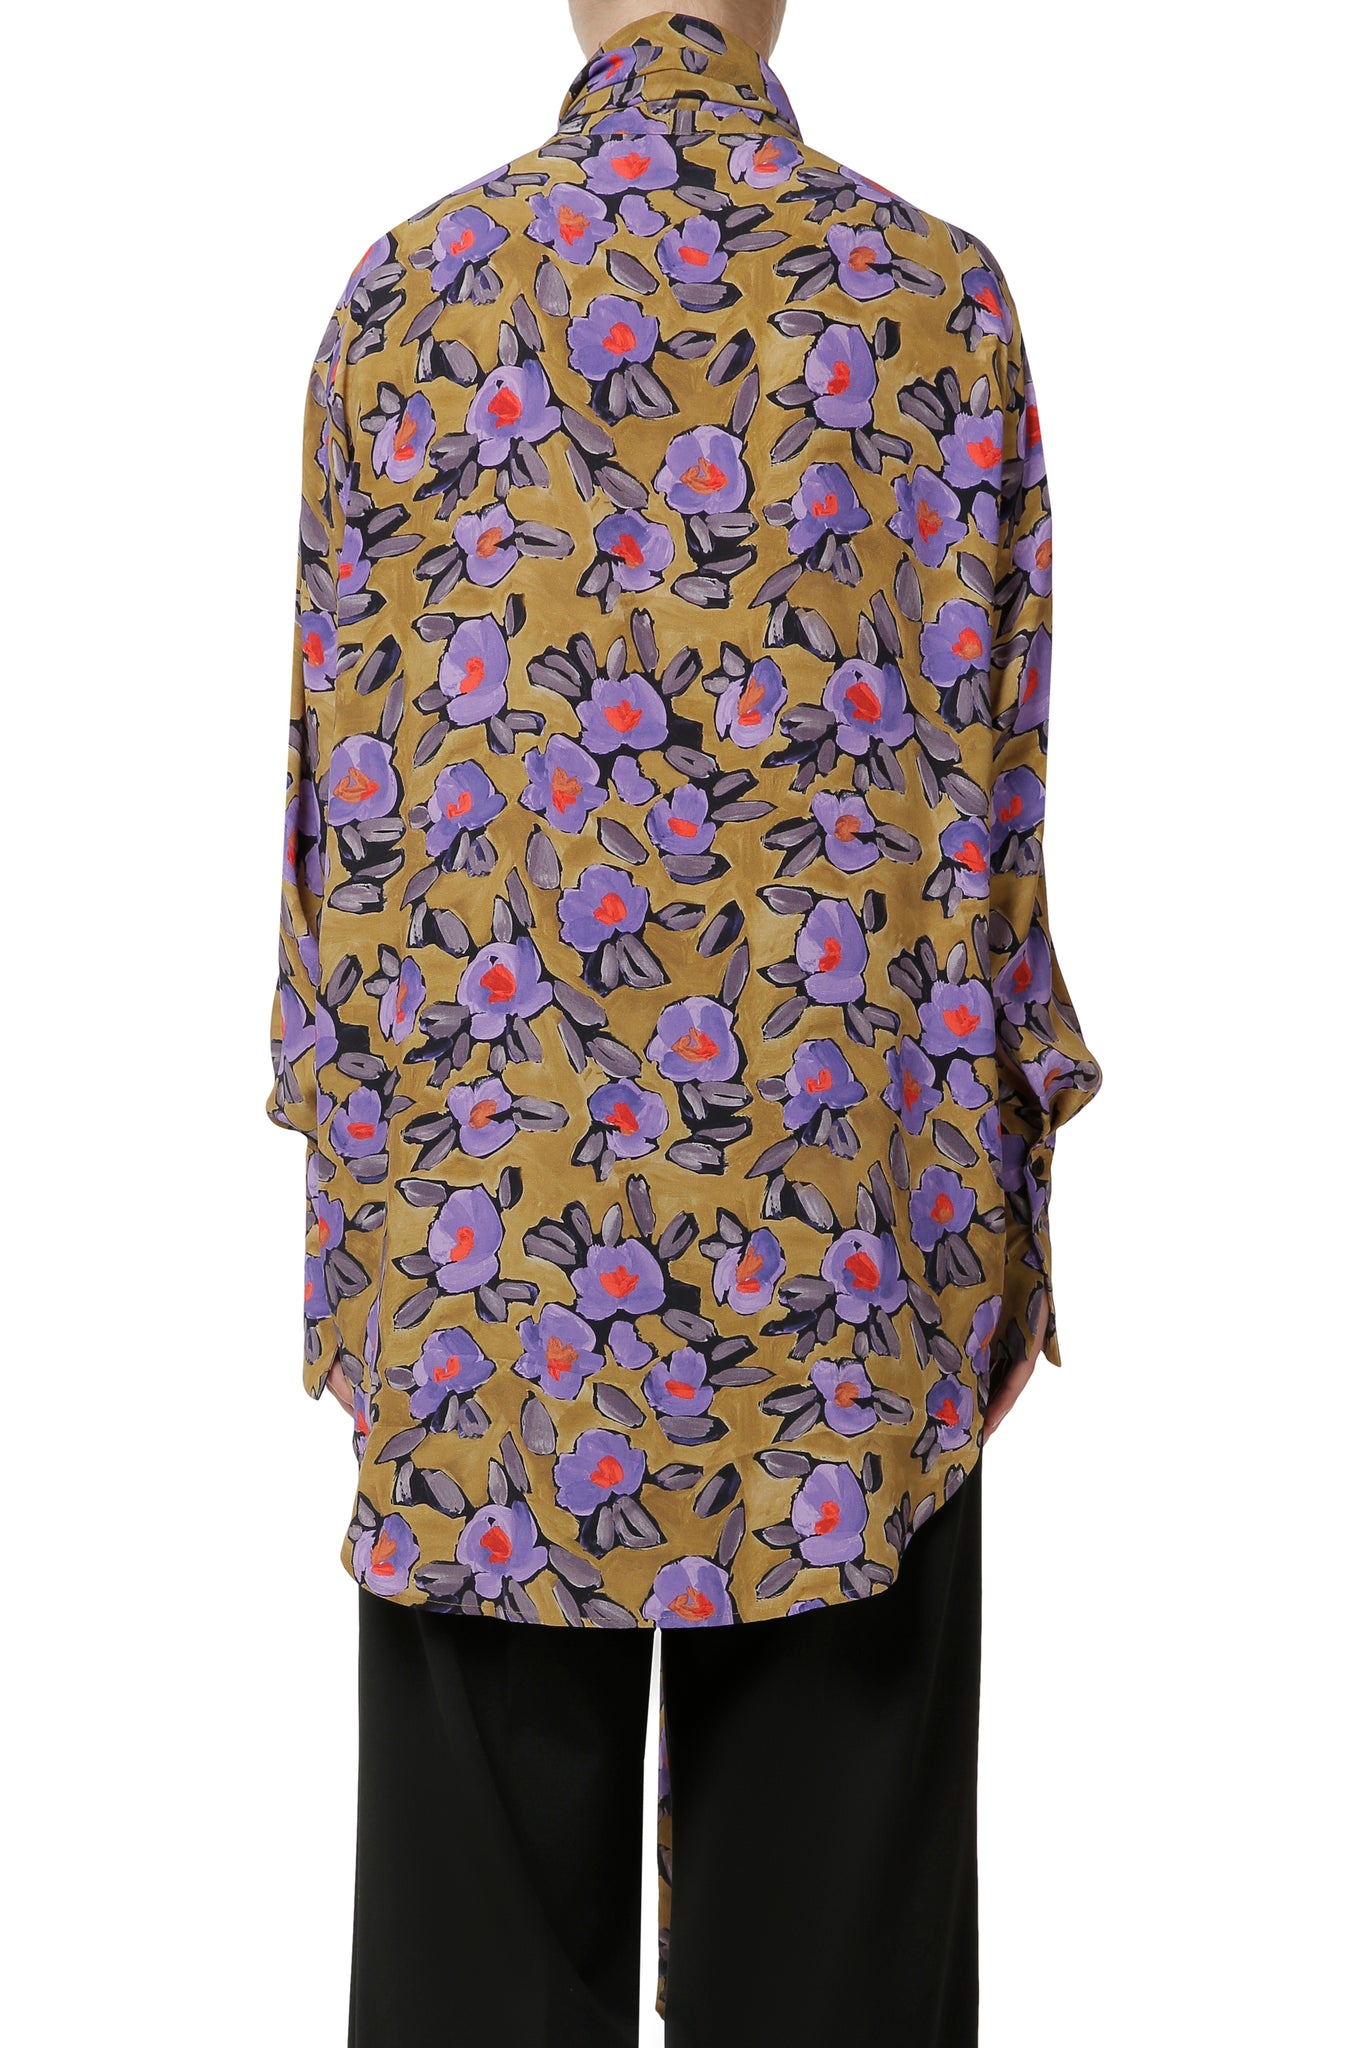 Floral blouse with ties on the neck